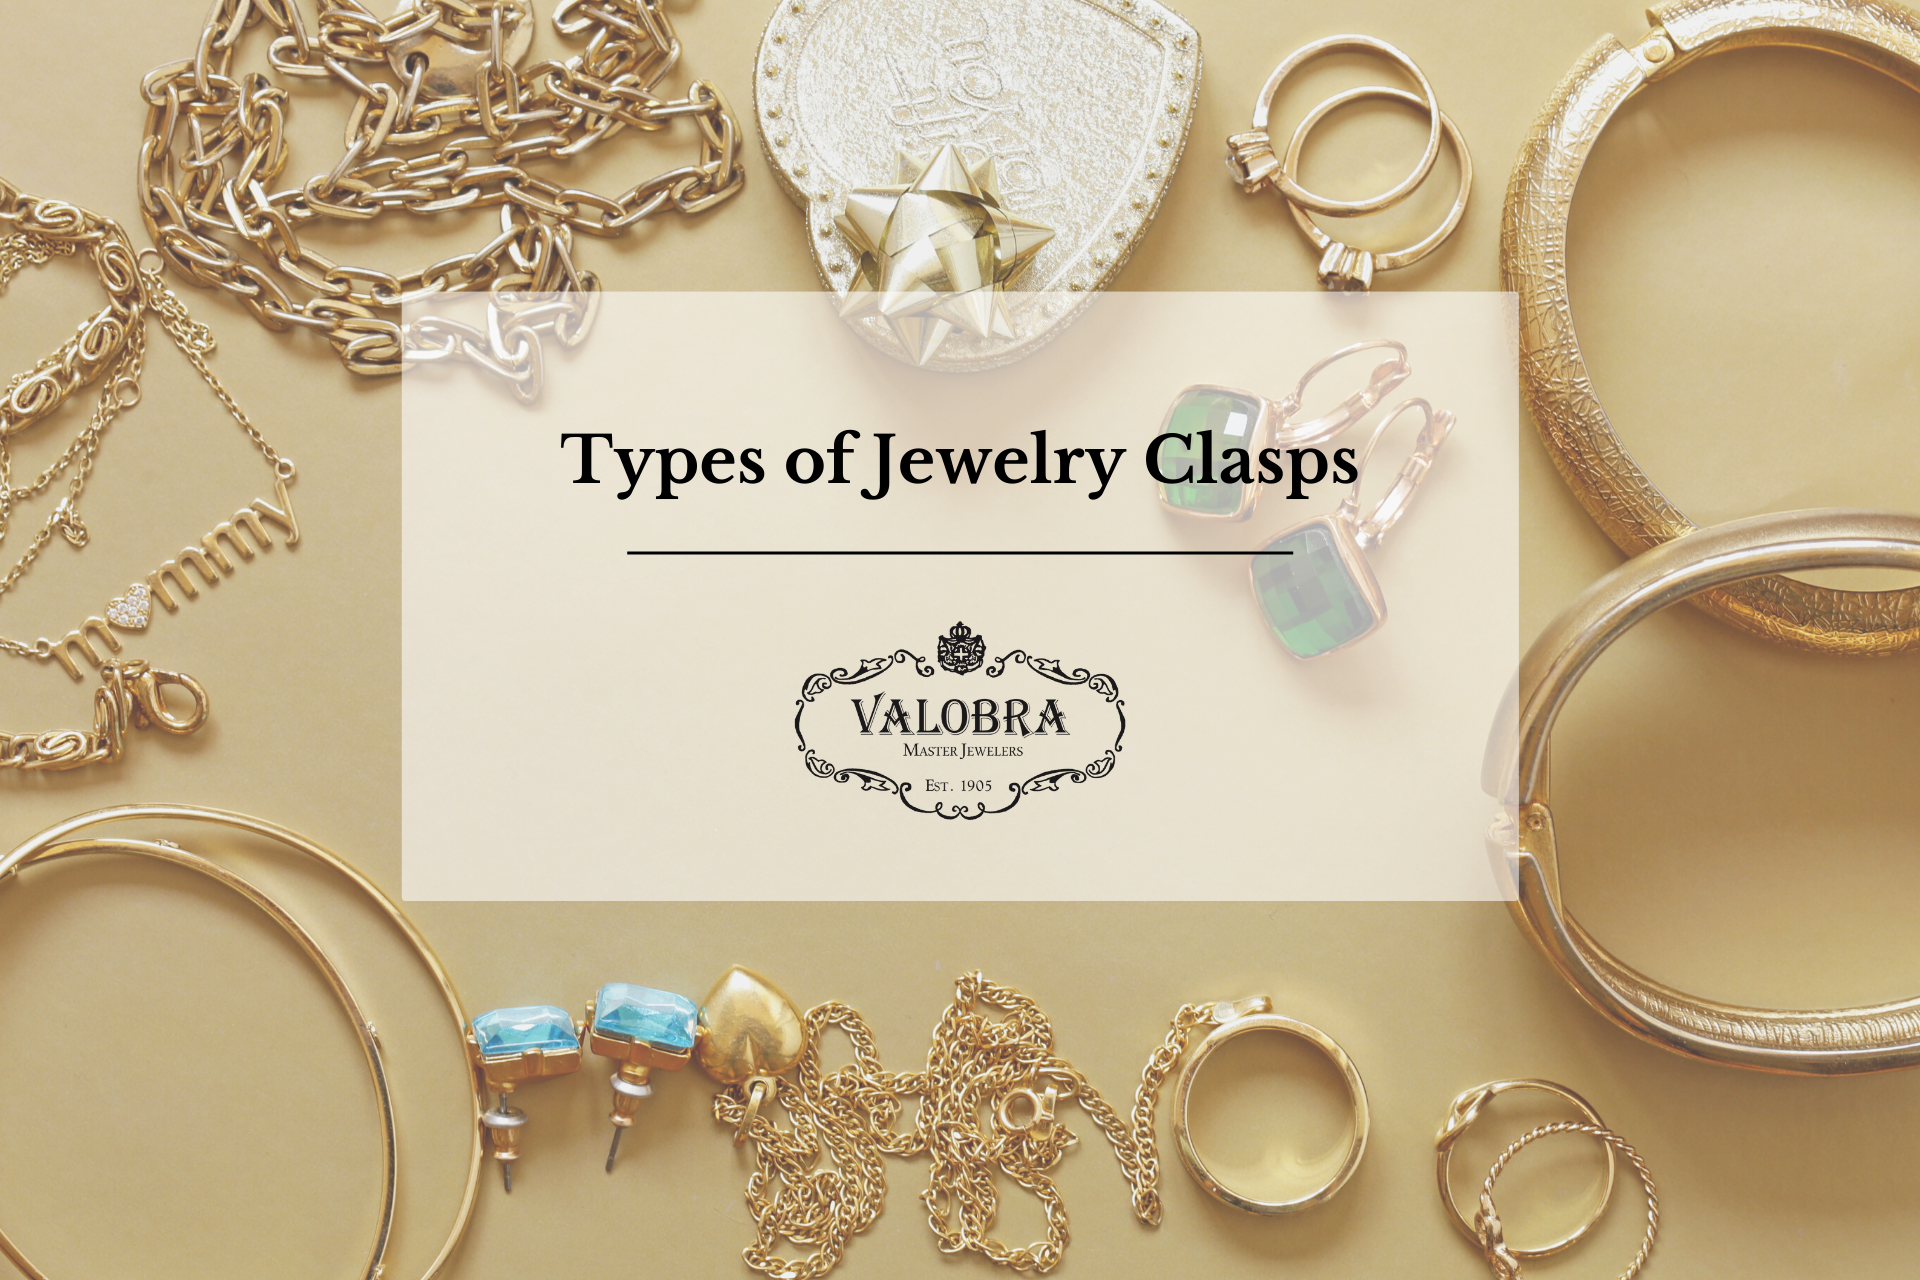 What is the best way to put on a necklace that has a small clasp